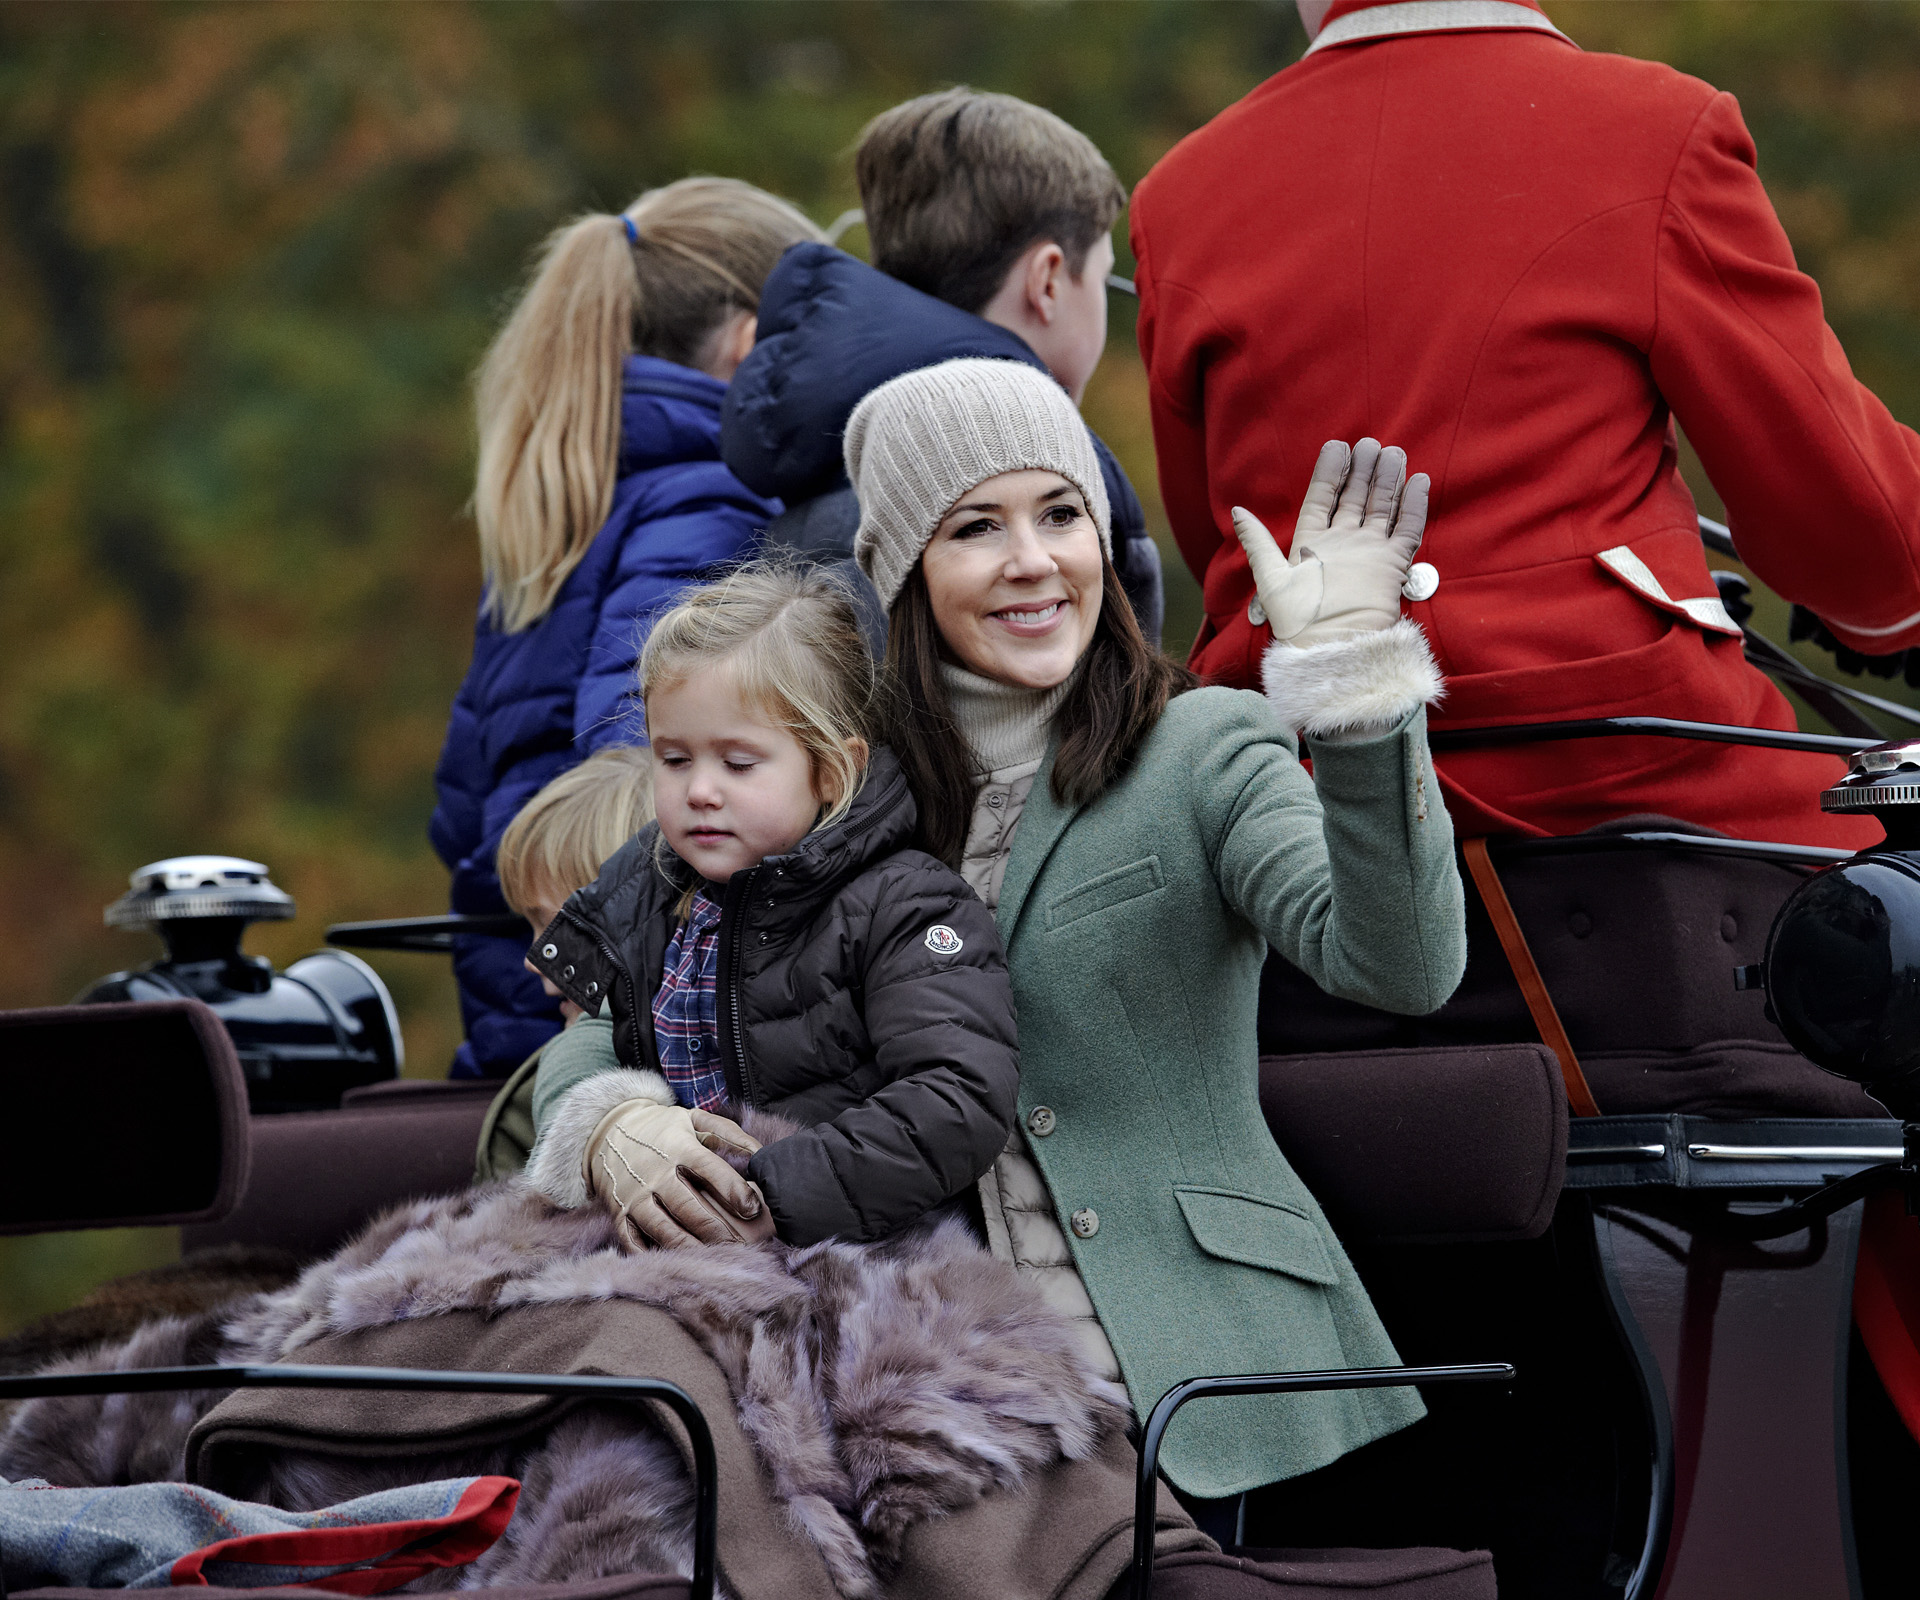 Royal love! Princess Mary gets cuddly with her kids